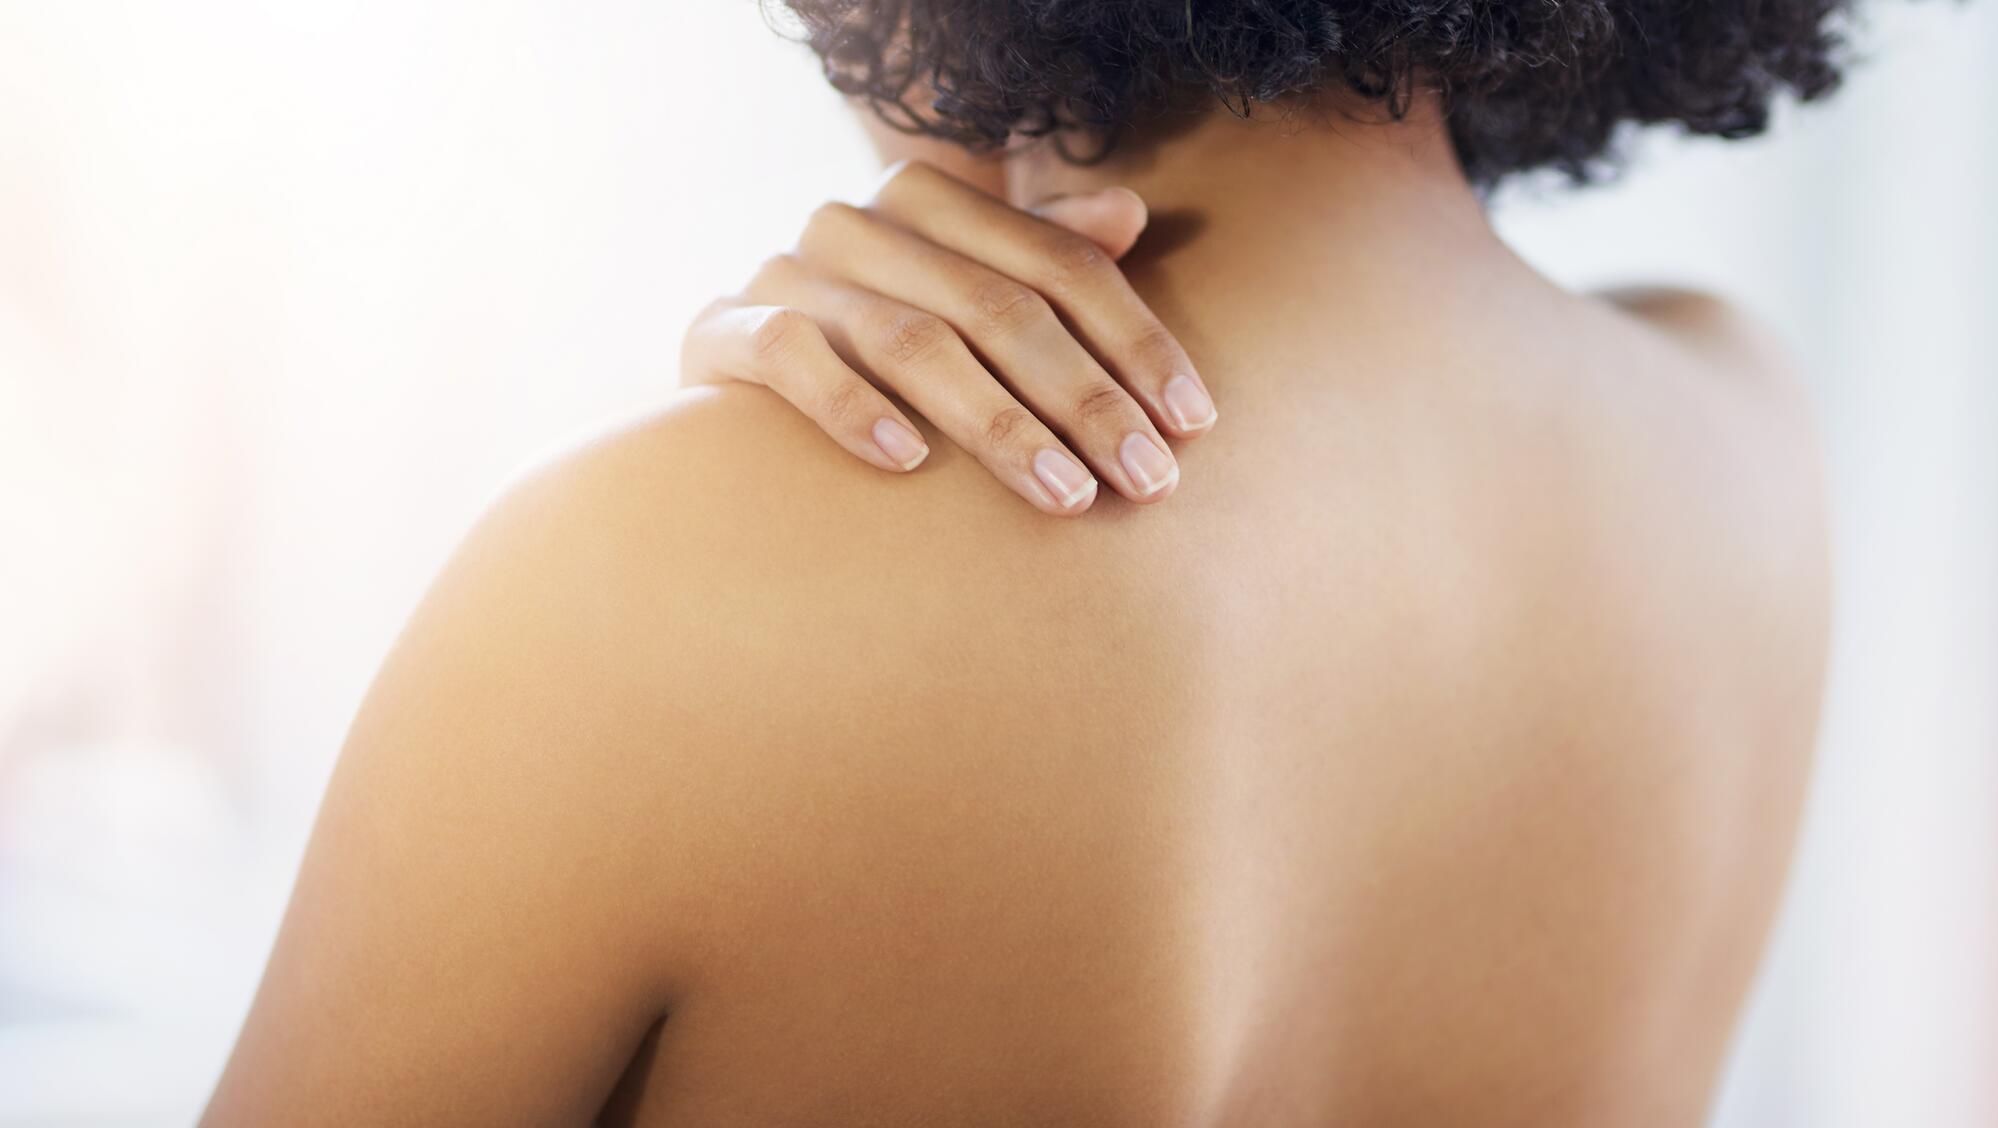 AD_PAINFUL-SKIN_WOMAN-HAND-BACK-SHOULDER_LARGE_2021